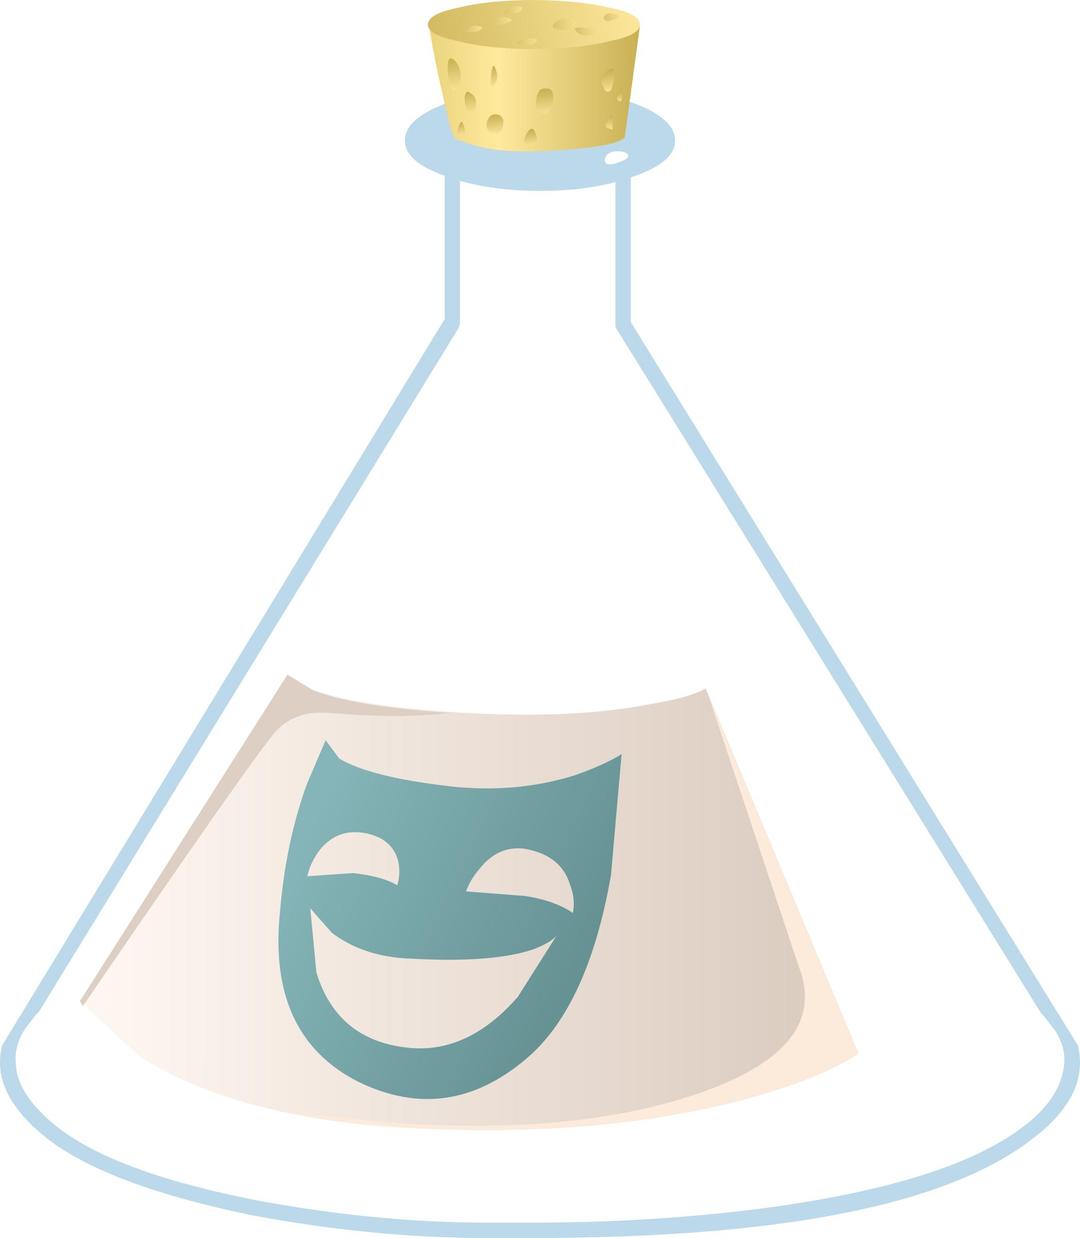 Misc Laughing Gas png transparent